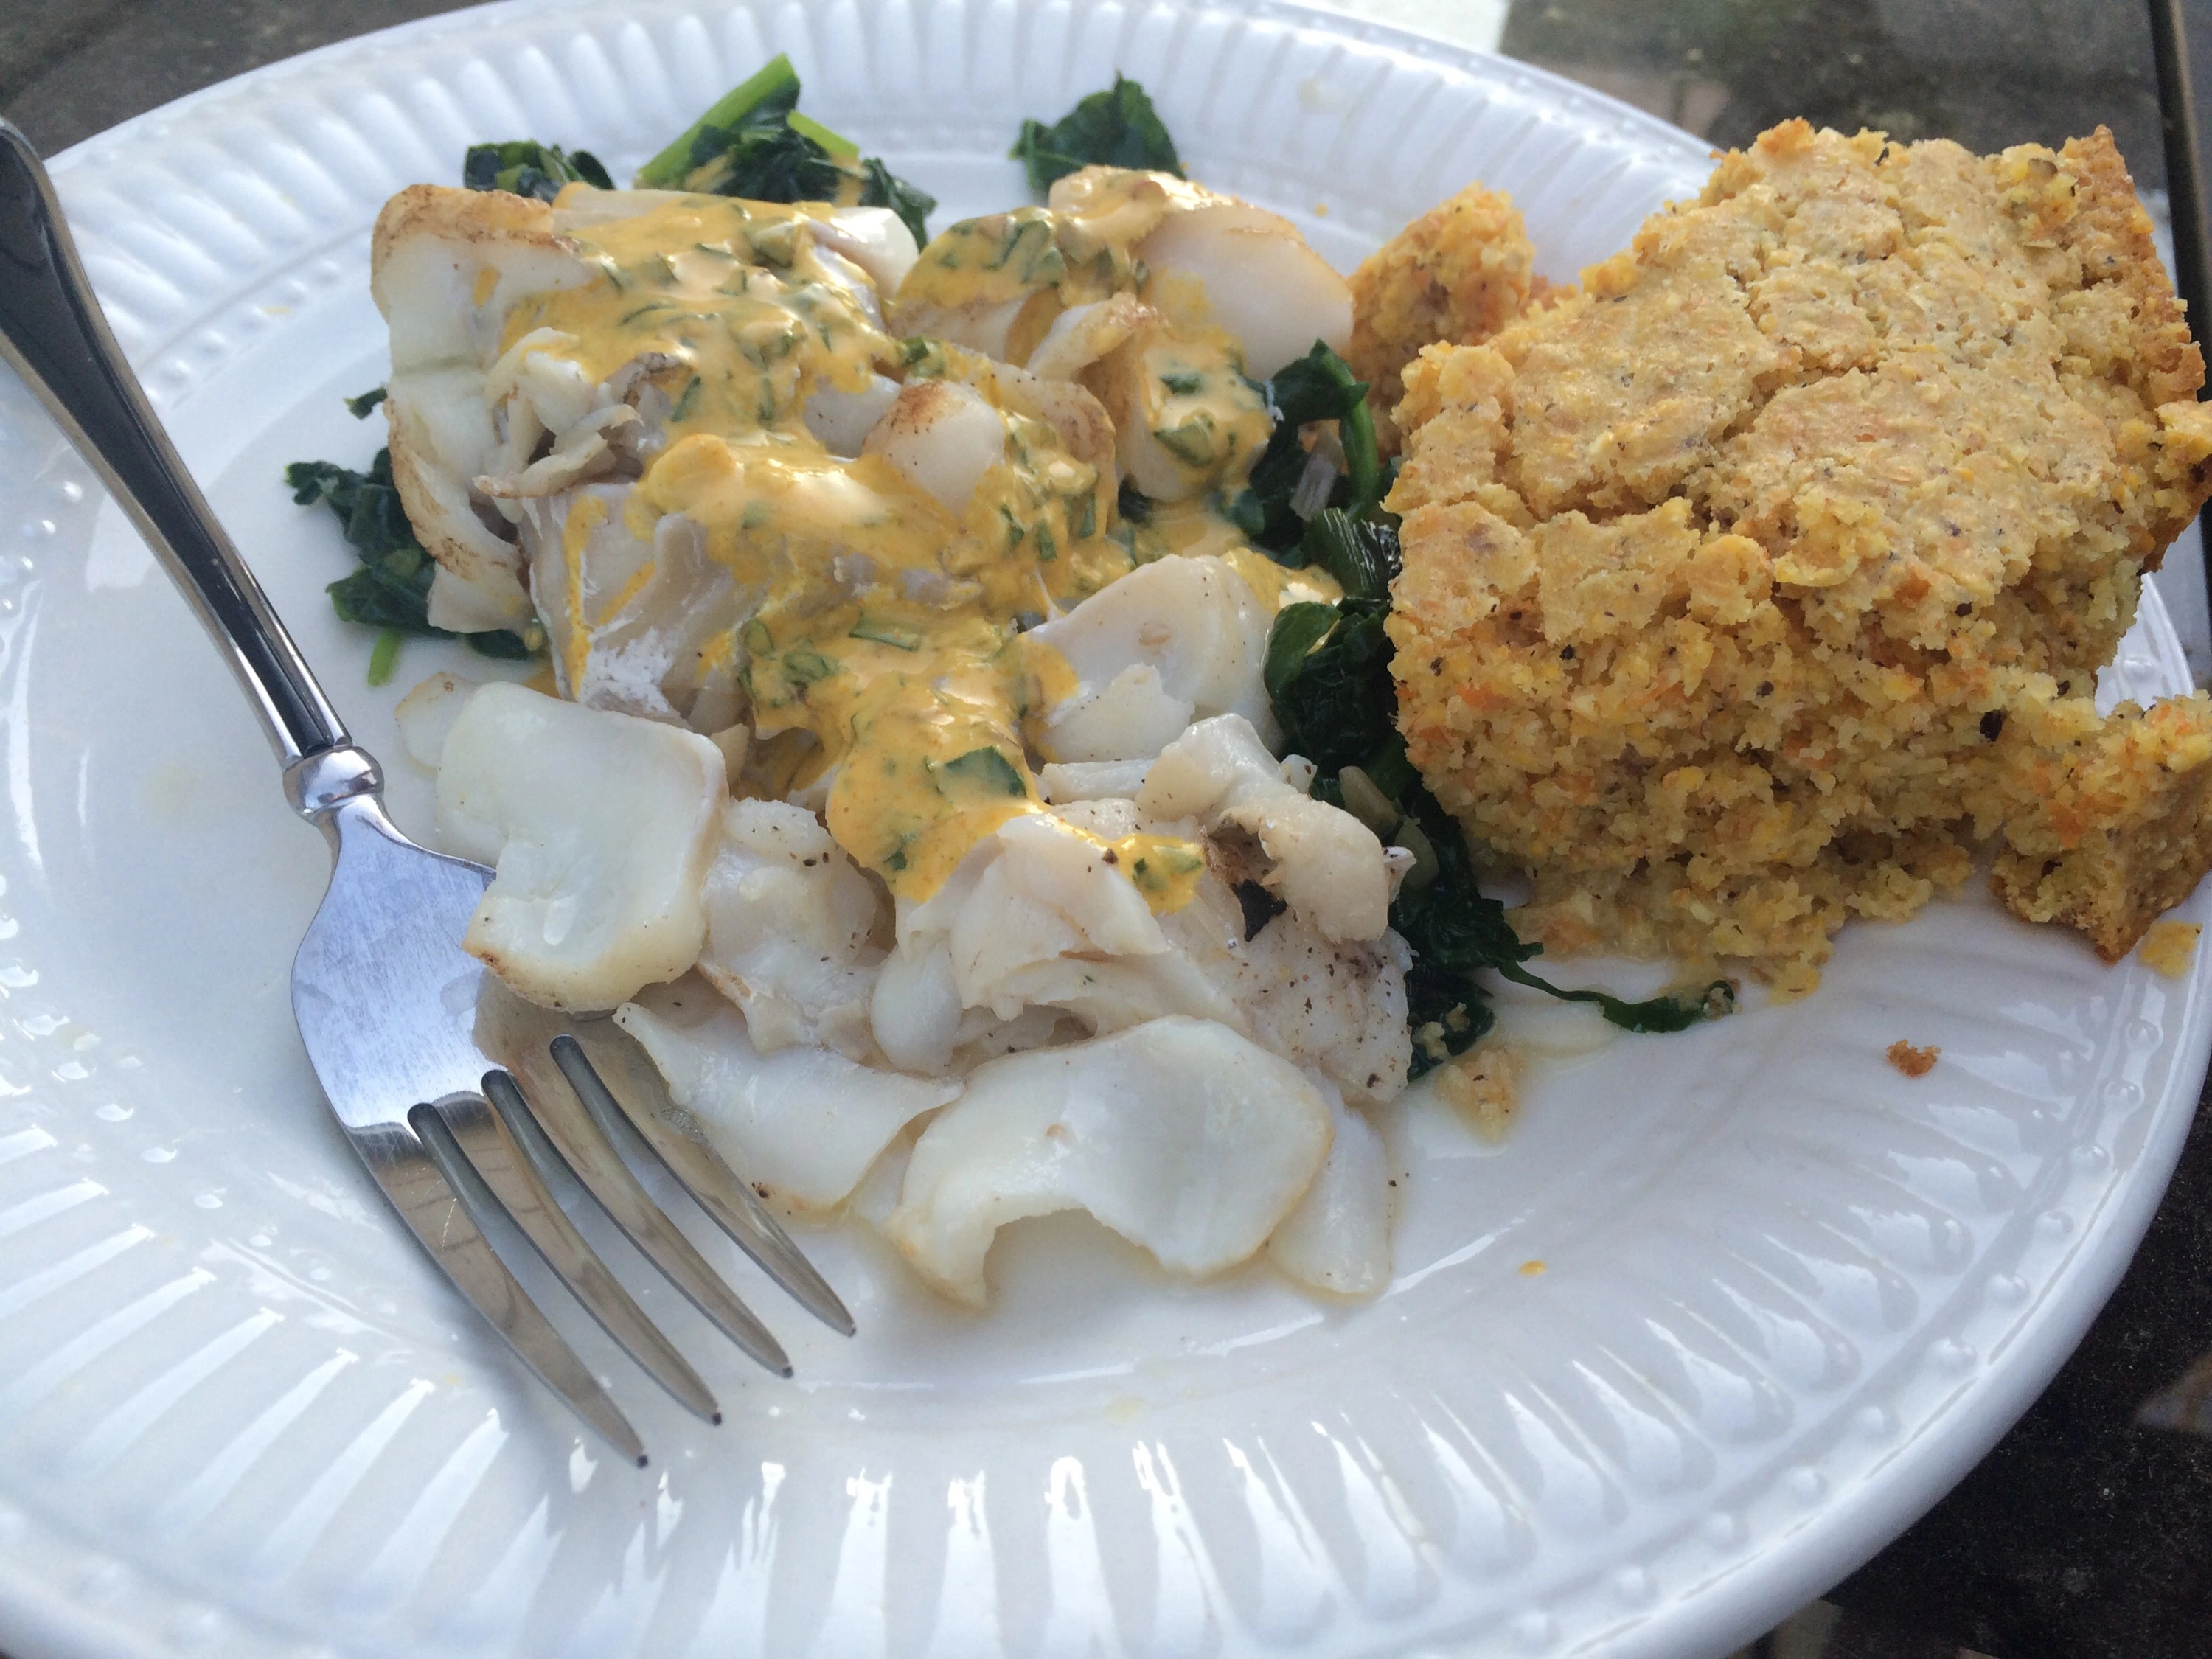 Haddock with ramps, spinach, and yogurt-ramp dressing